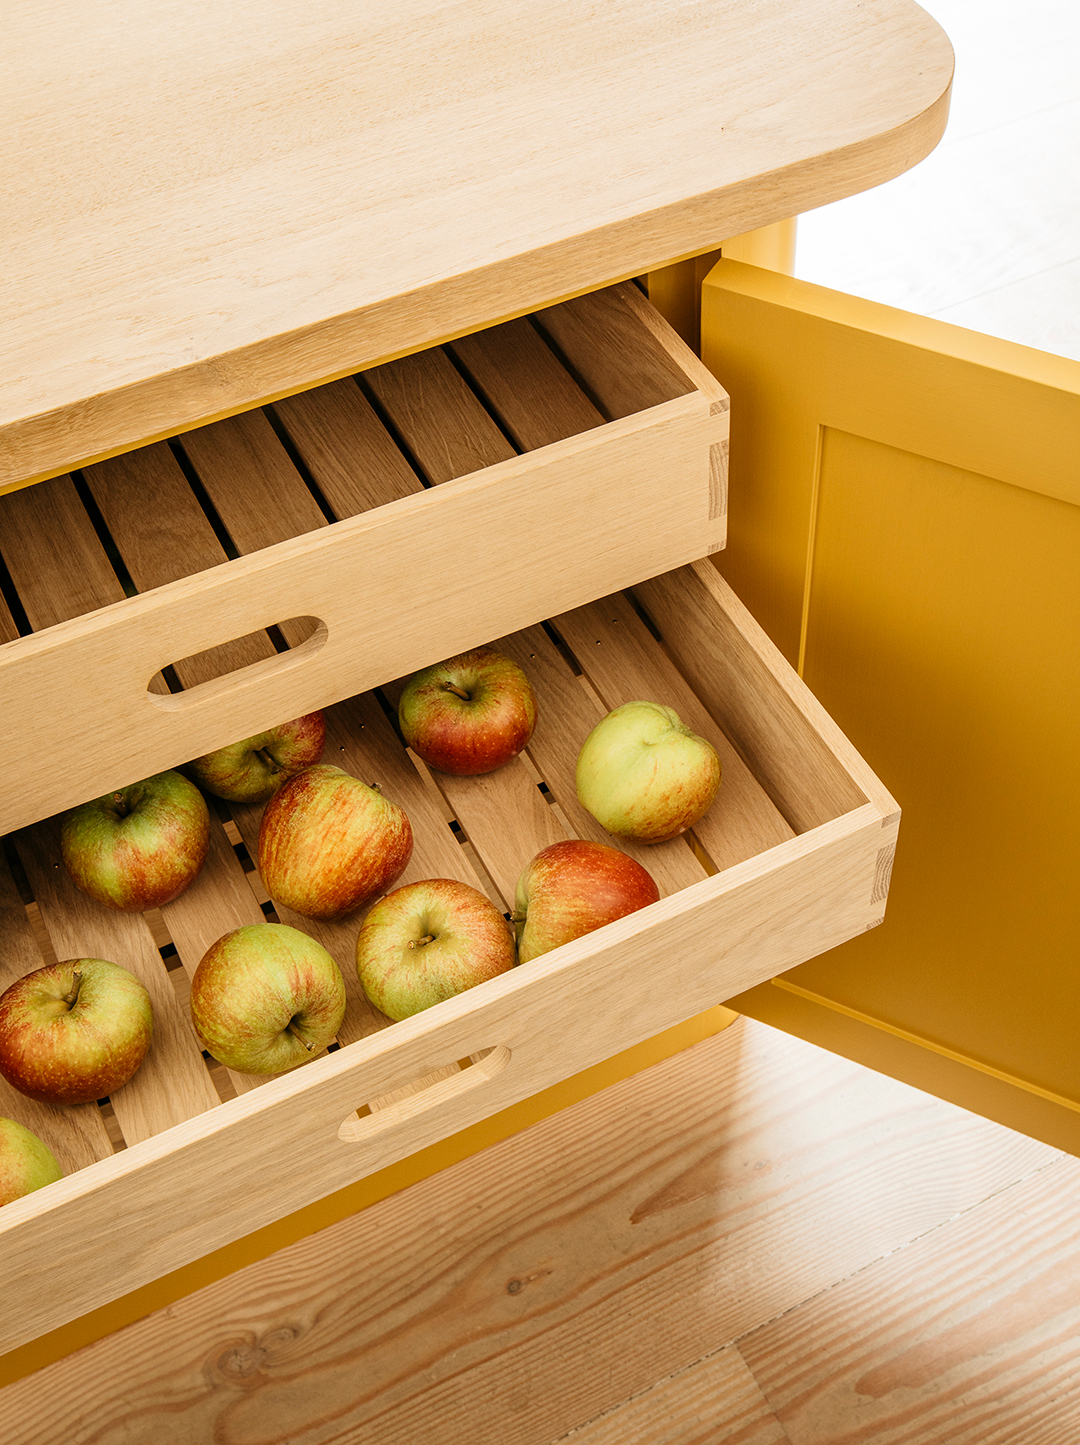 How to store fruits and vegetables: Produce storage ideas